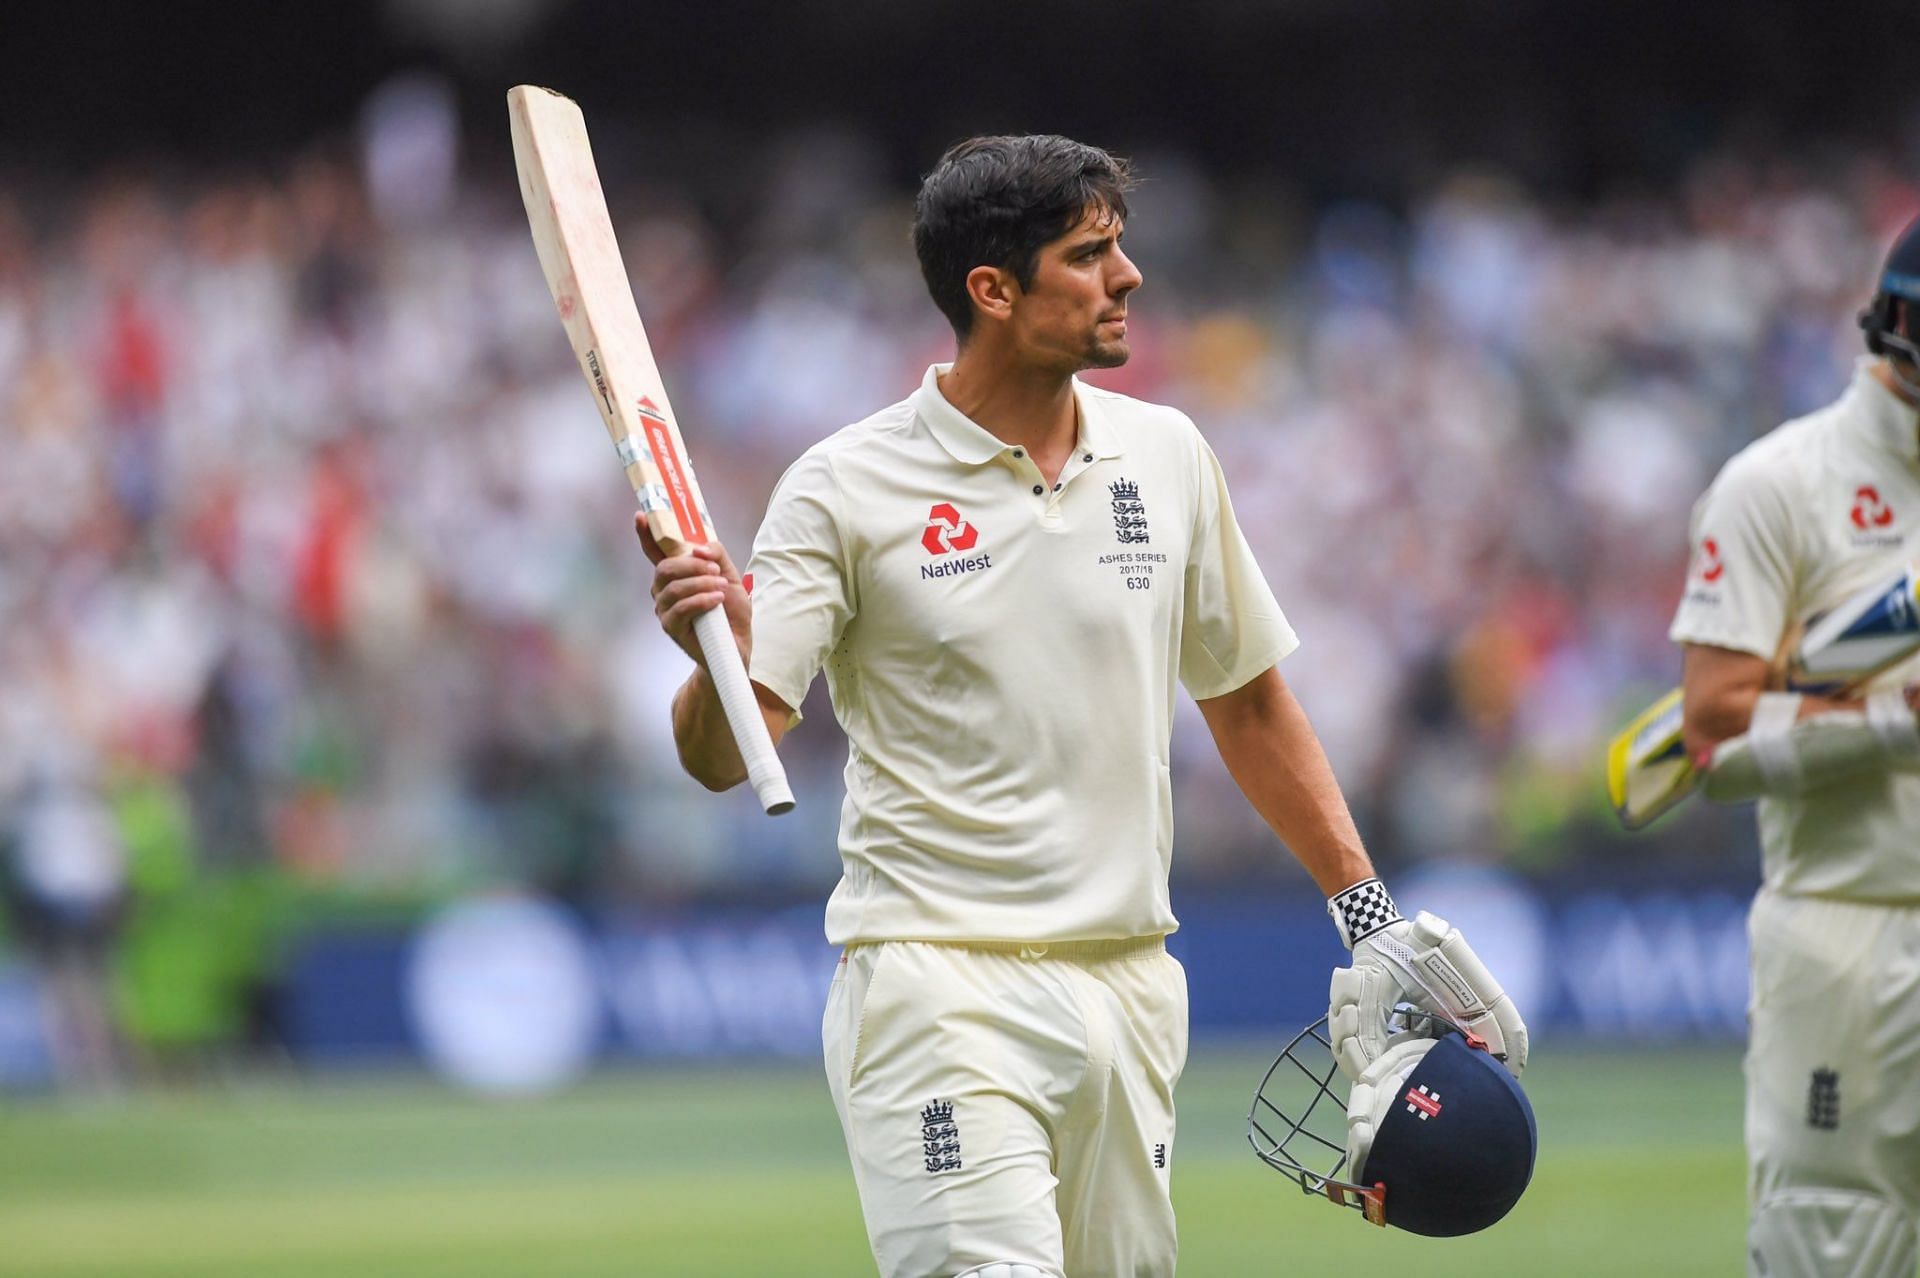 Alastair Cook. (Image Credits: Twitter)